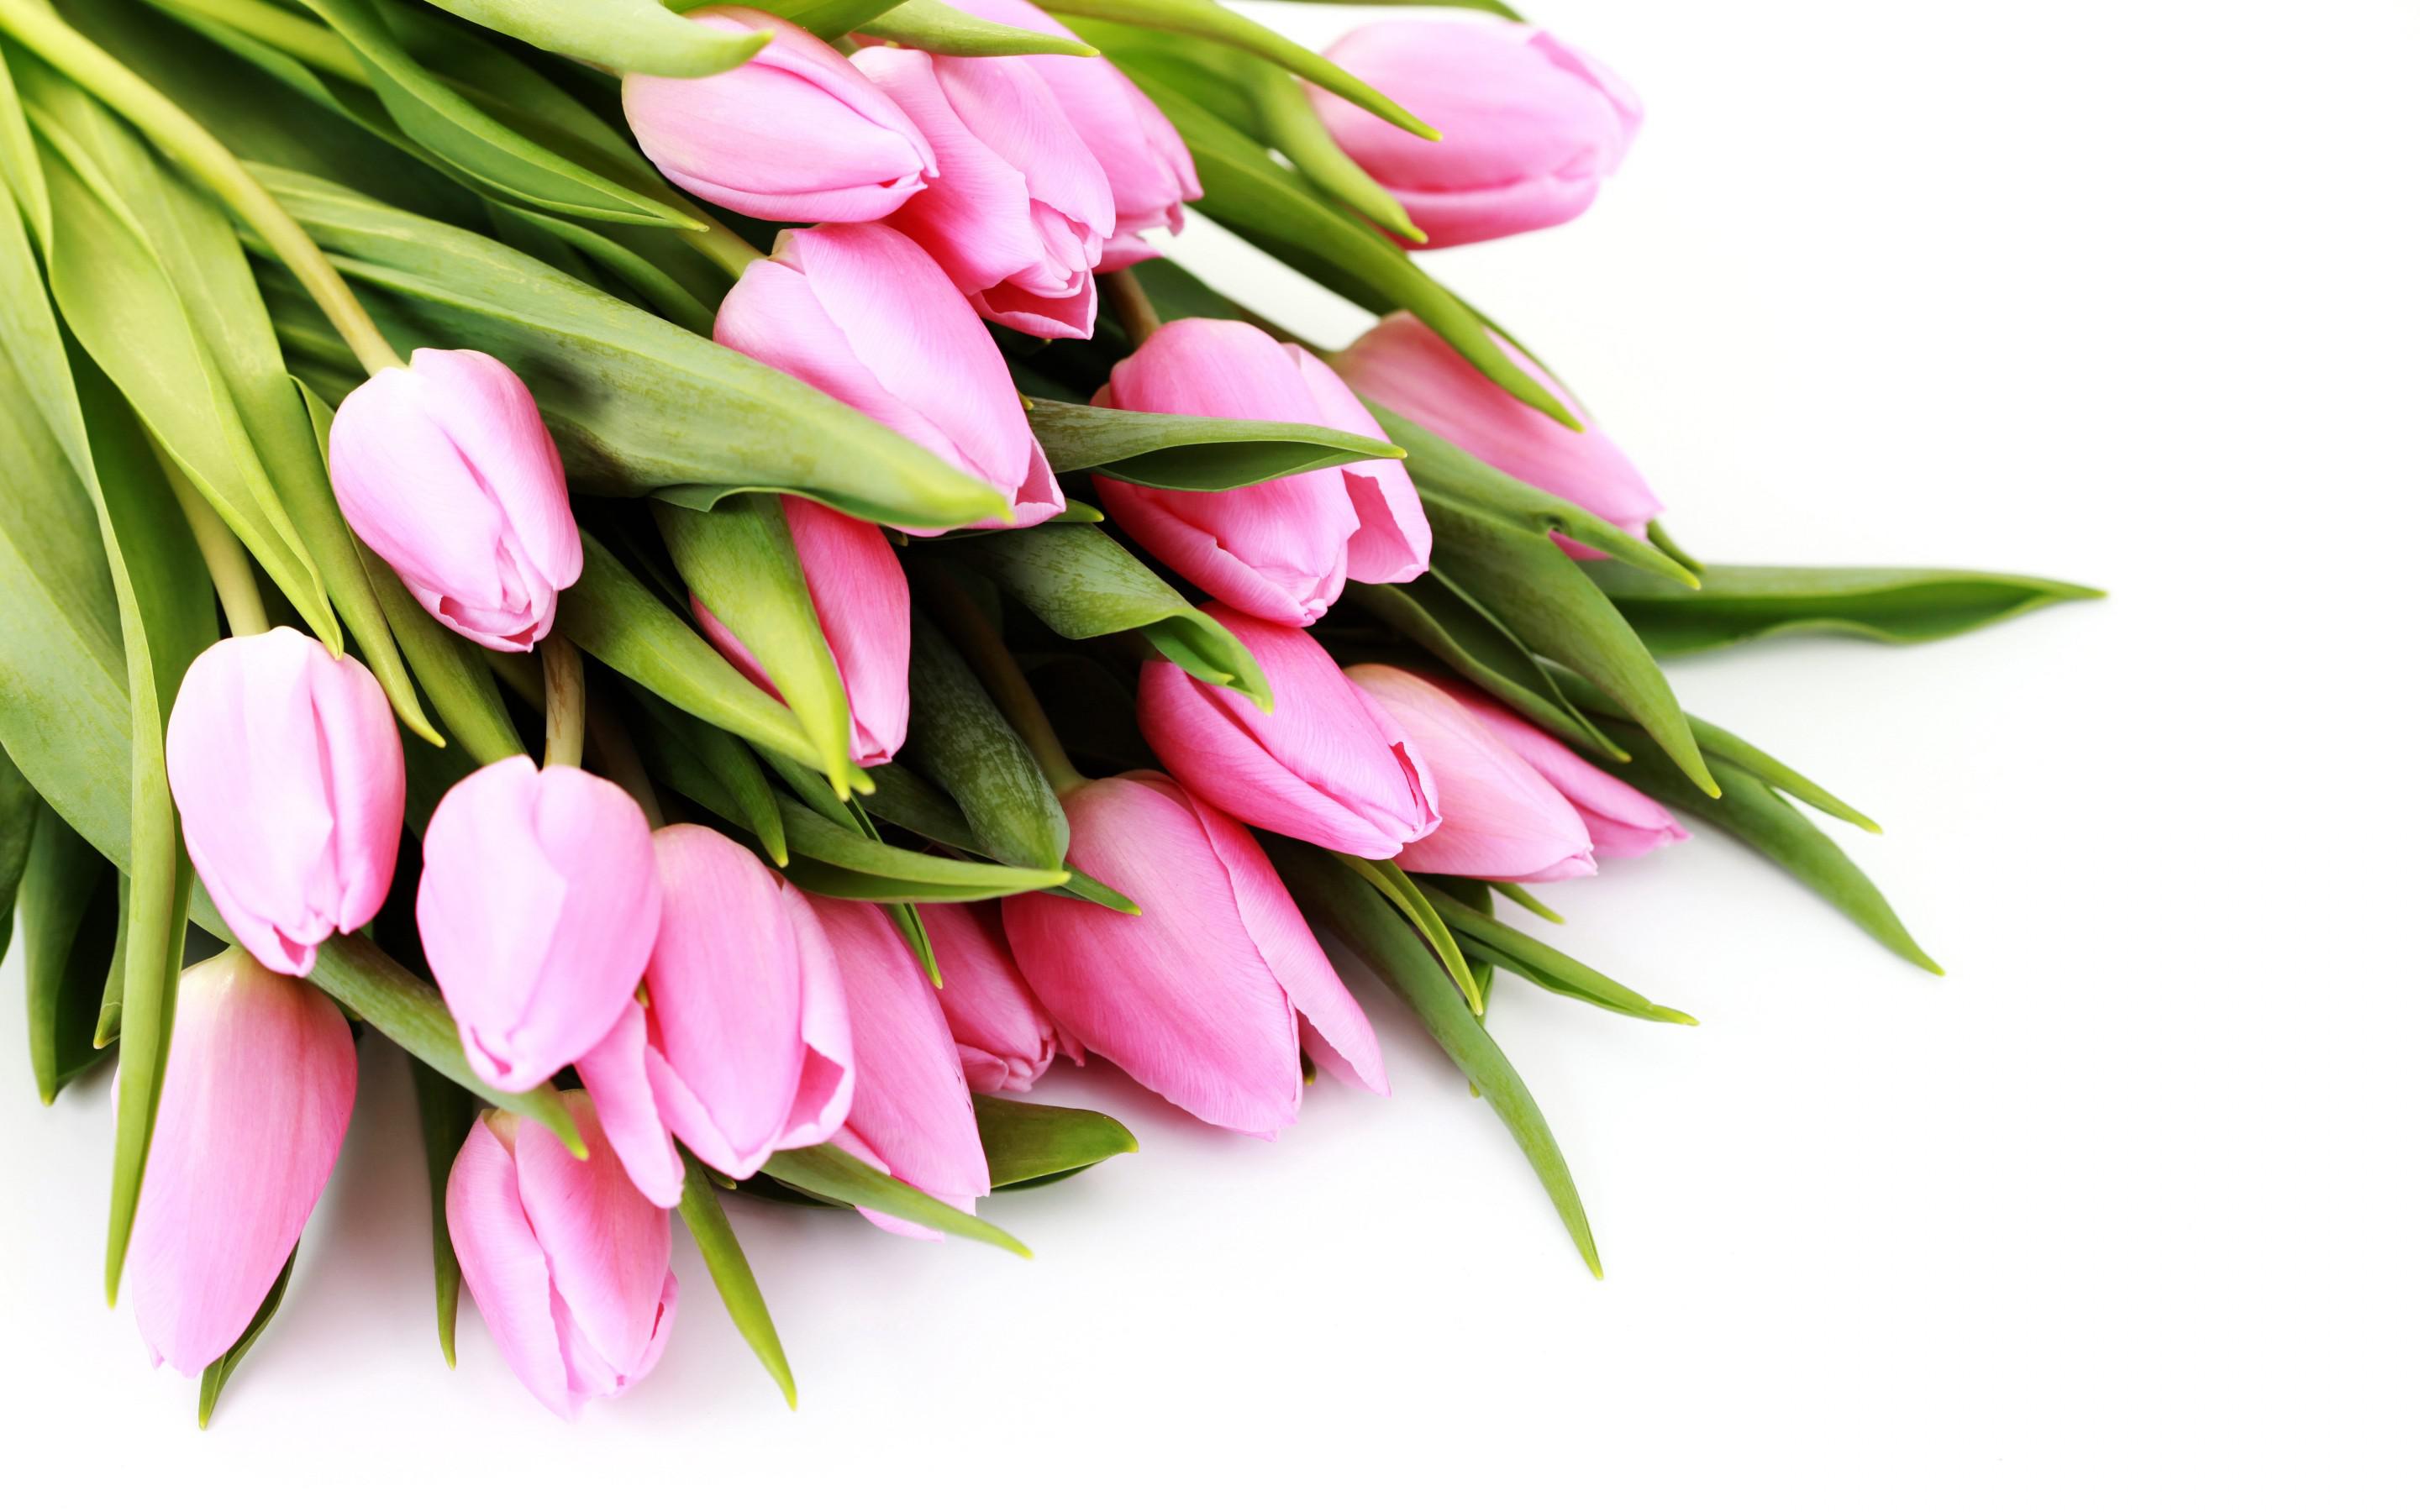 Wallpaper Tags: flower nature pink flowers tulips